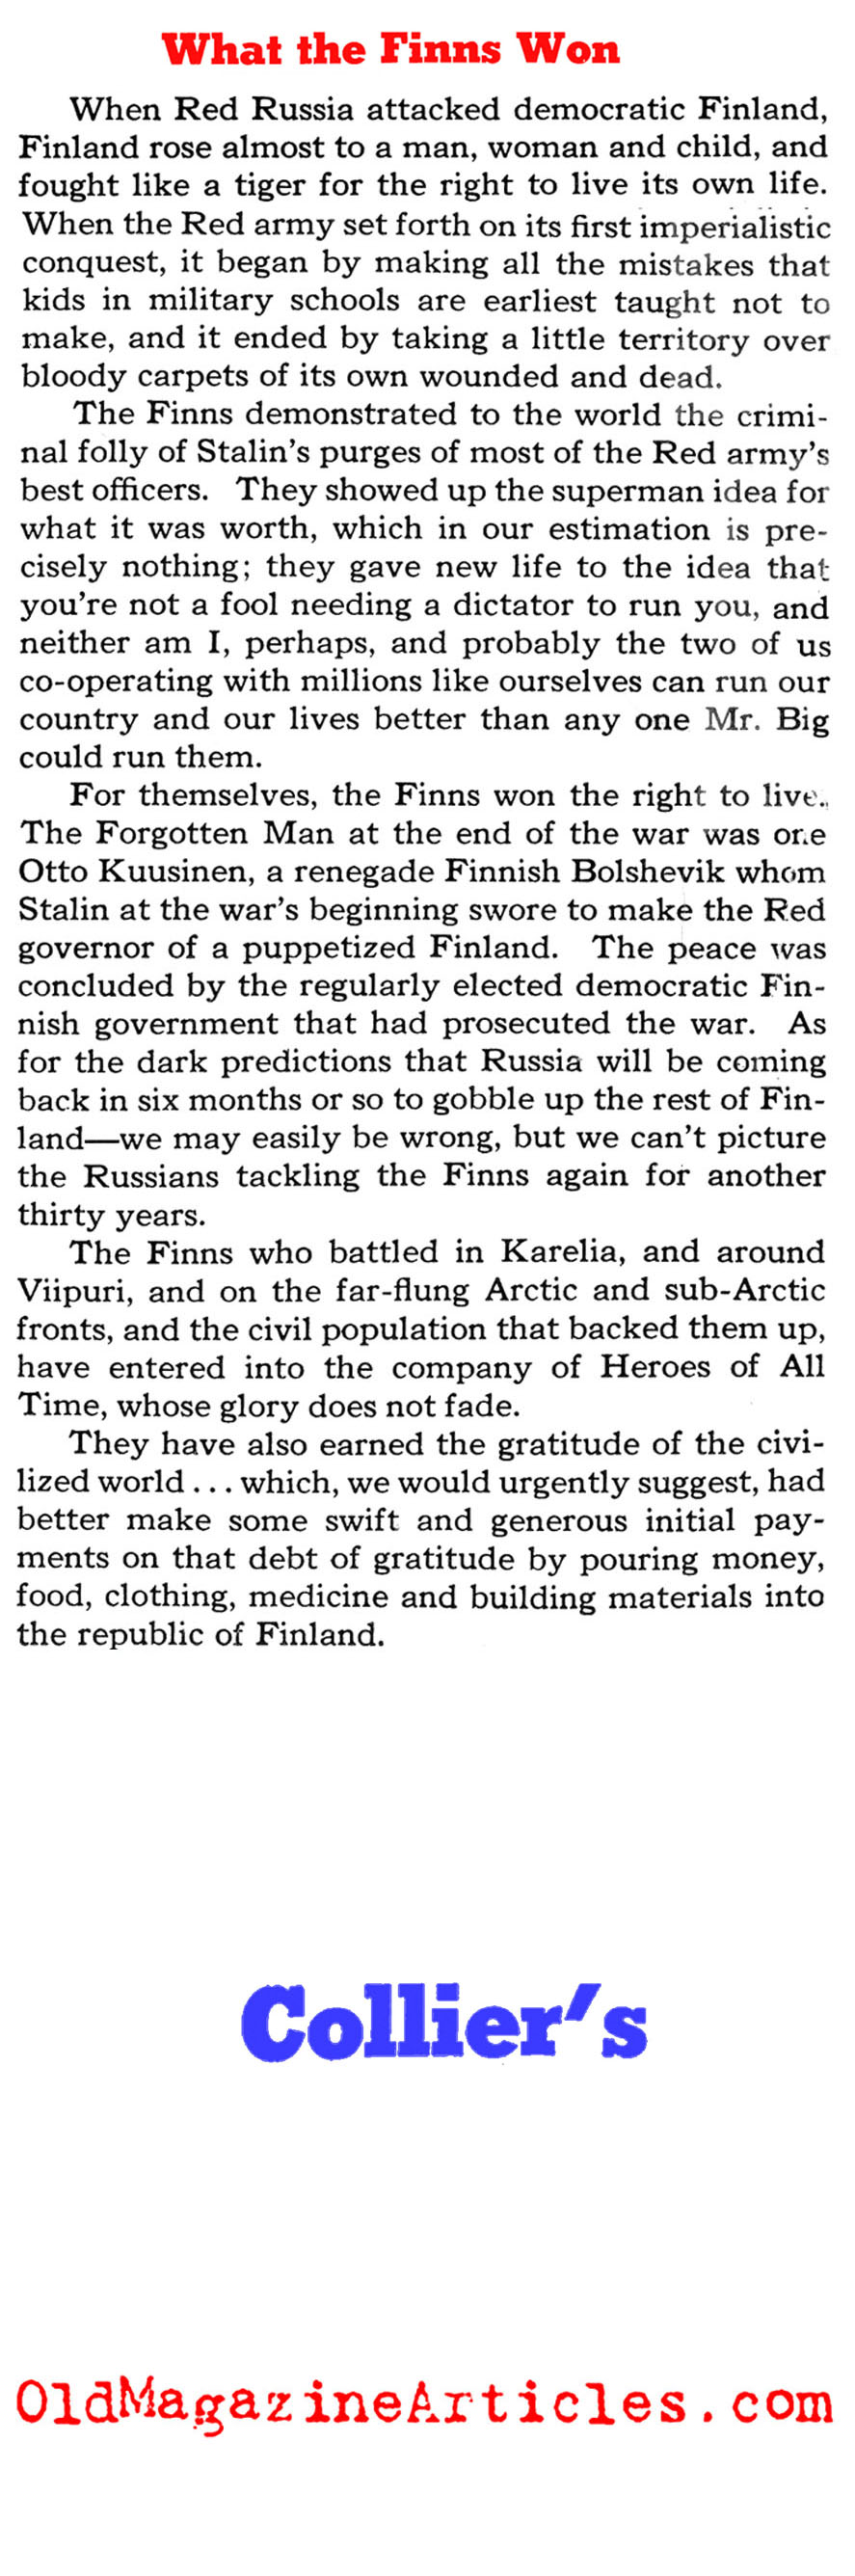 ''What the Finns Won''<BR> (Collier's Magazine, 1940)